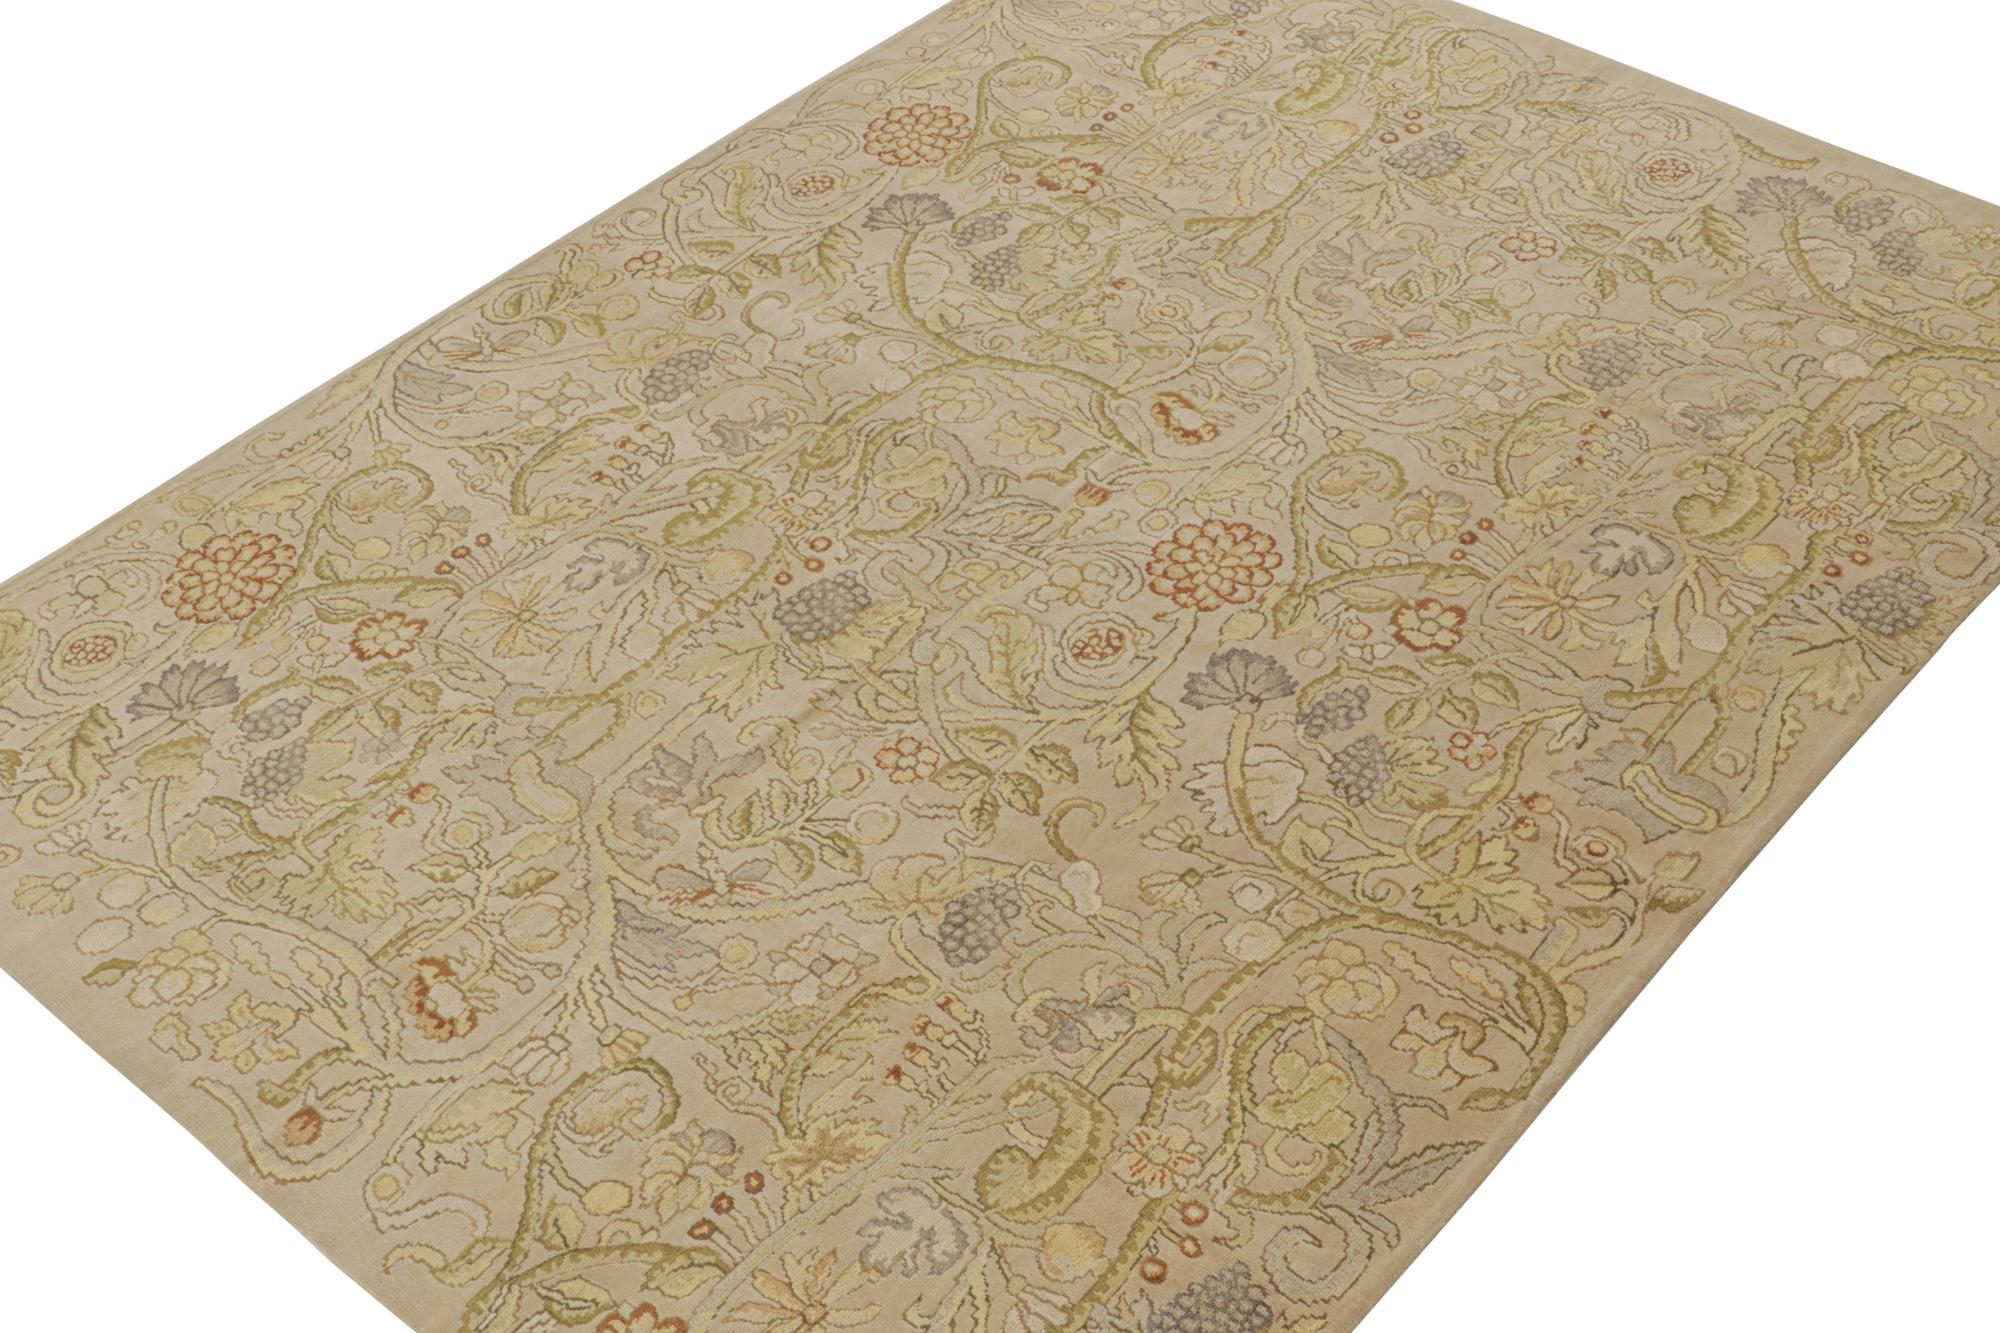 Hand-Knotted Rug & Kilim’s English Tudor Style Flatweave in Beige with Floral Patterns For Sale